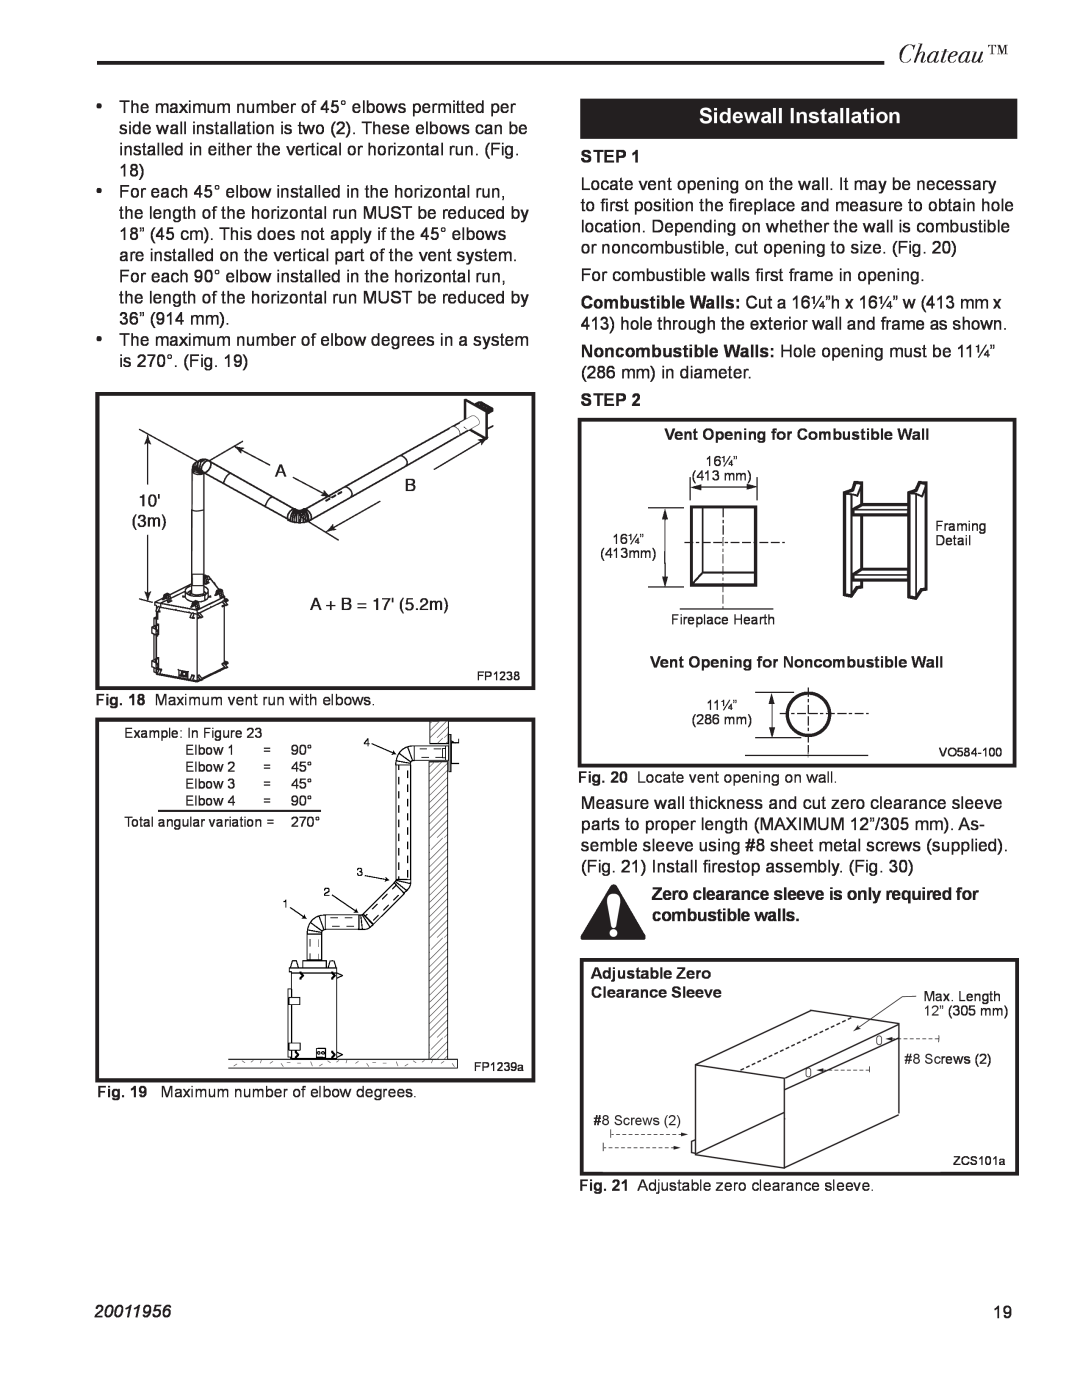 CFM Corporation DVT38IN, DVT44IN installation instructions Sidewall Installation, Chateau, Step, 20011956 